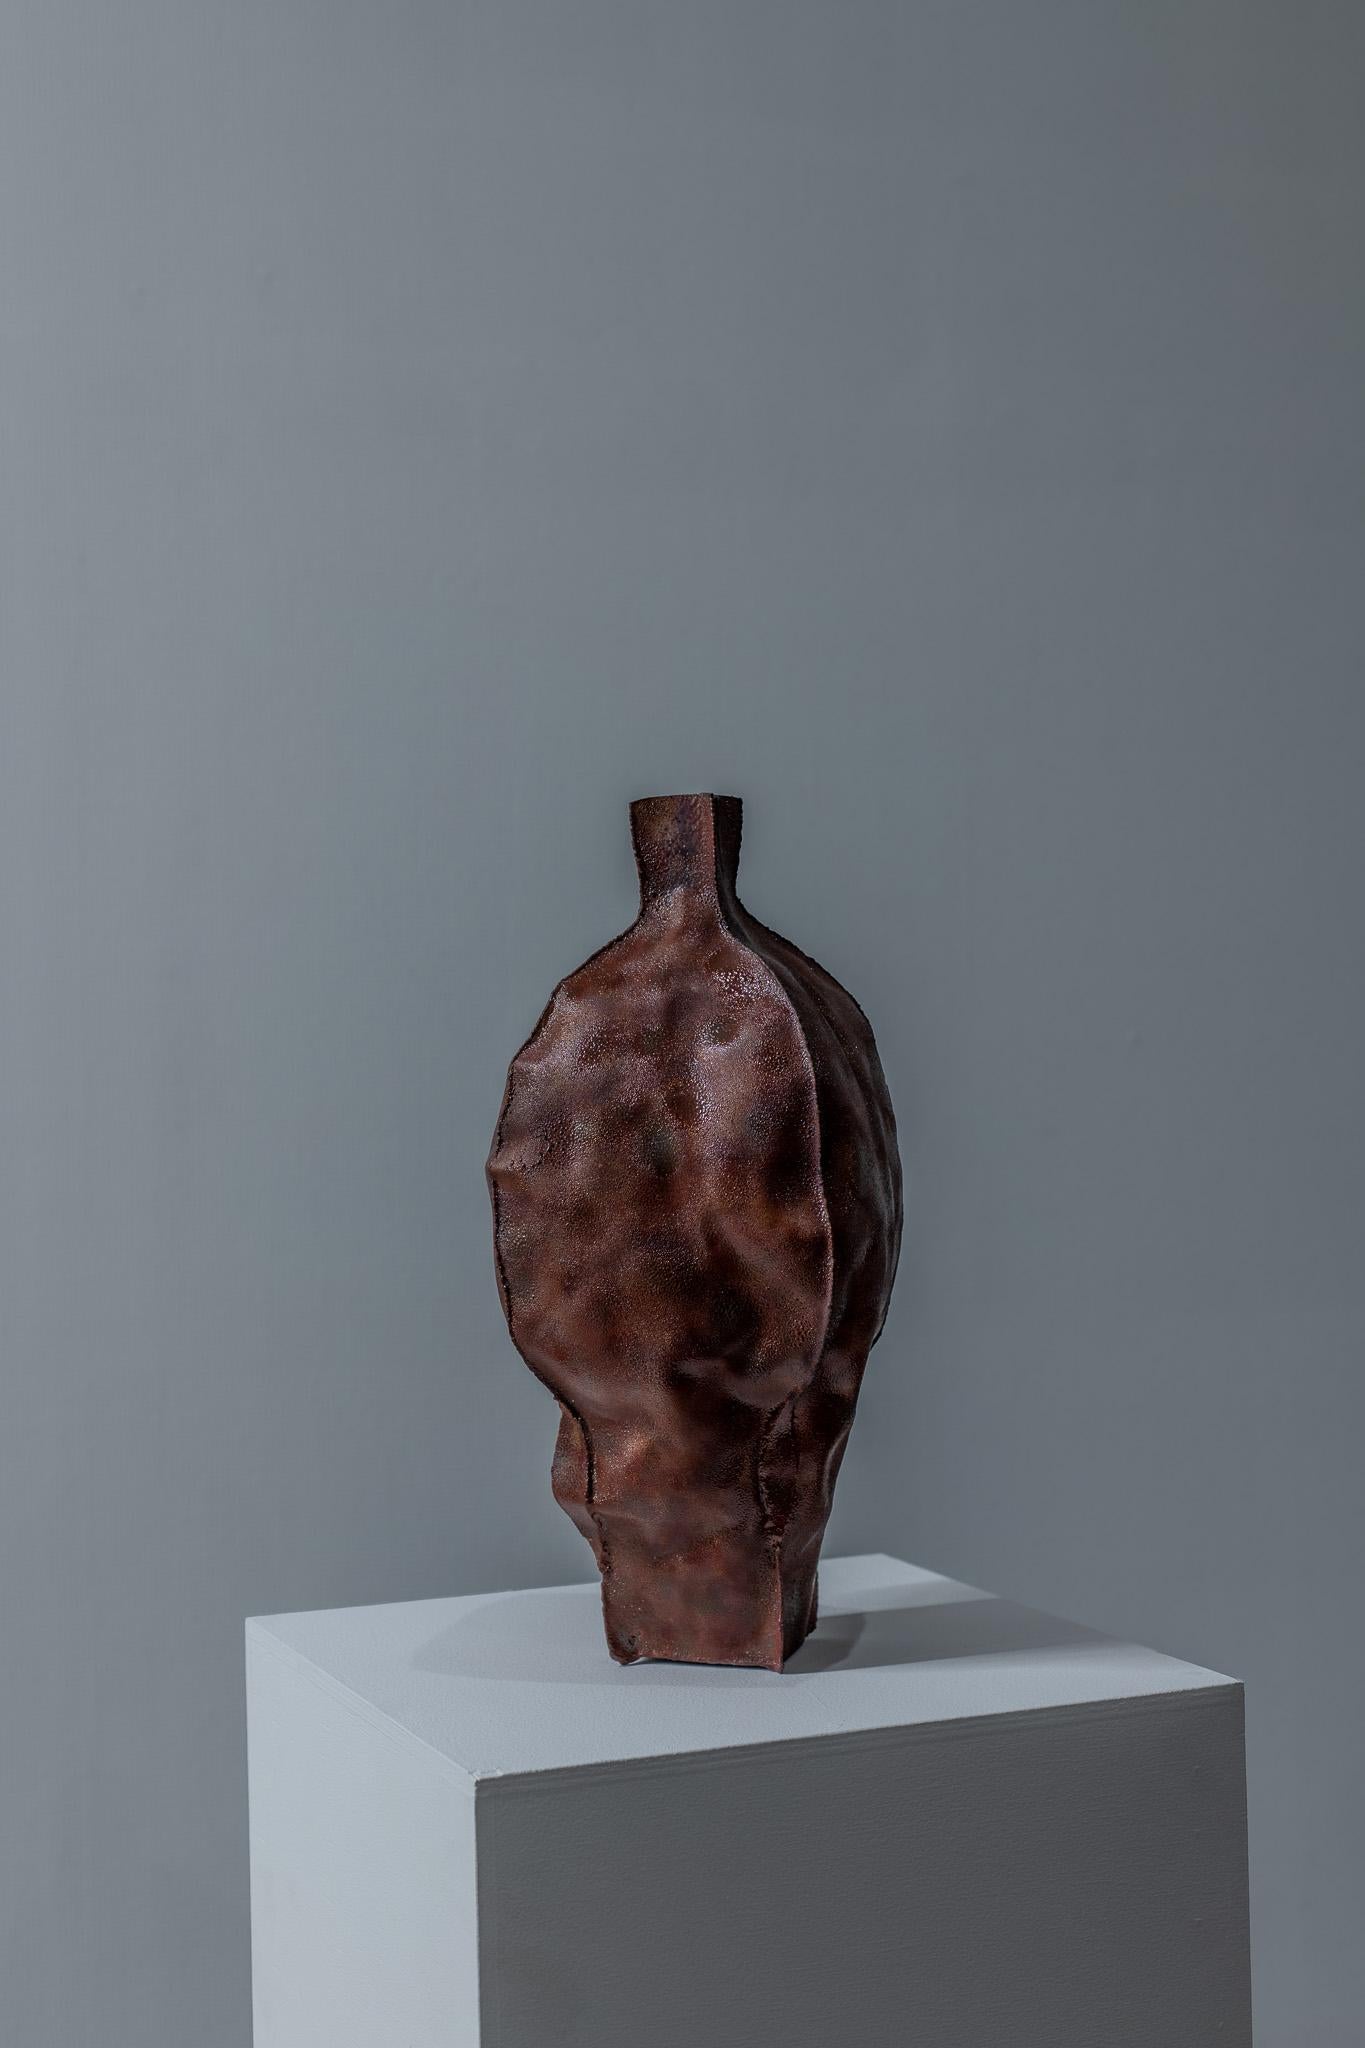 Contemporary Japanese Cloissoné Copper Vessel Shippo Vase 4 by Yochiya Studio In New Condition For Sale In Amsterdam, NL